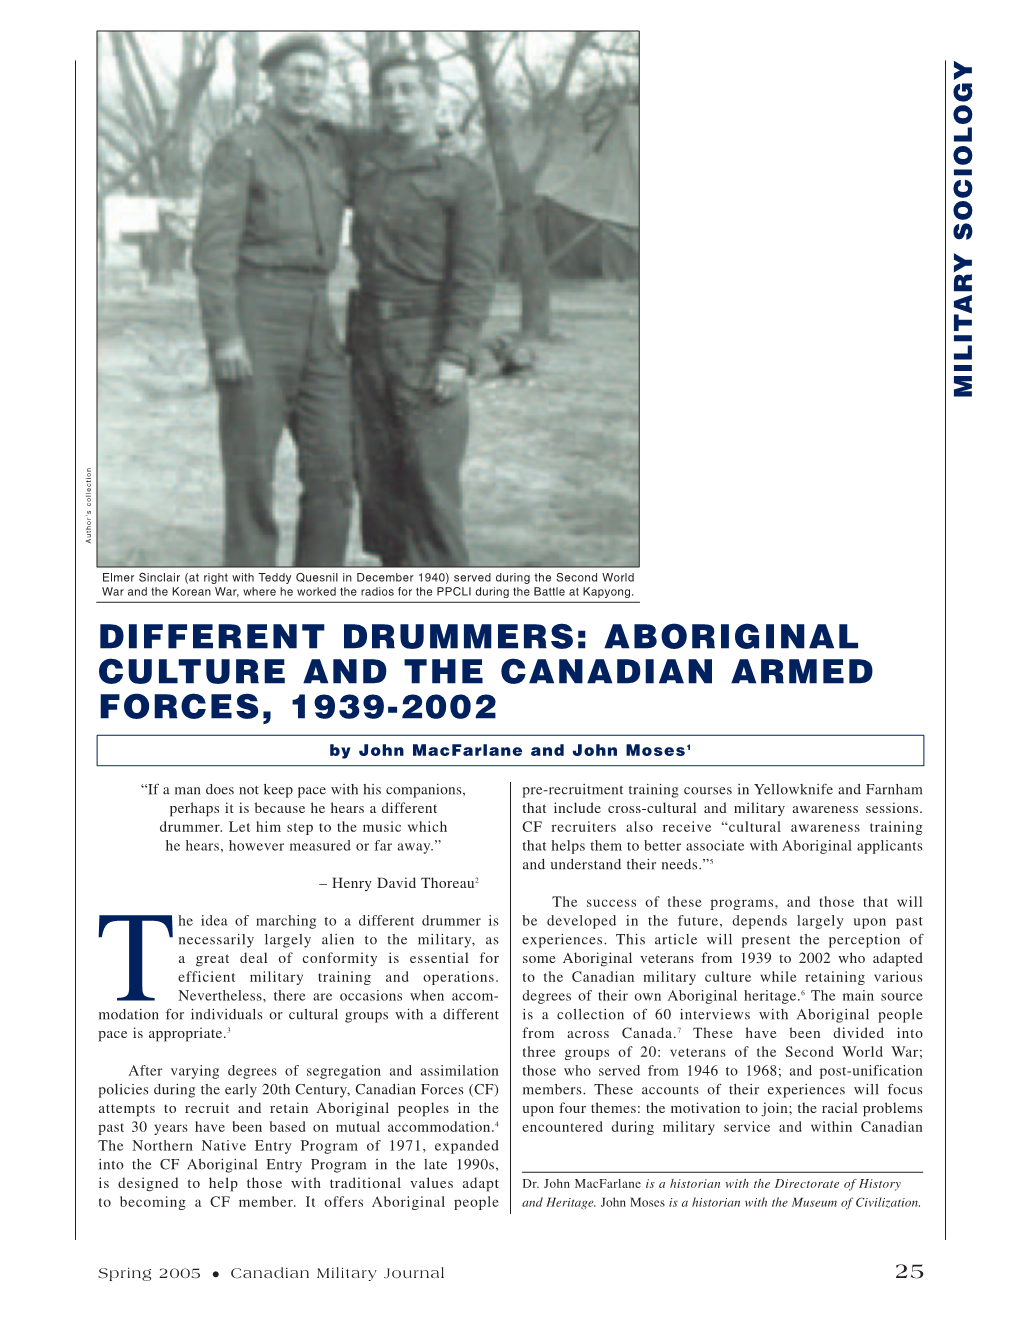 Aboriginal Culture and the Canadian Armed Forces, 1939-2002